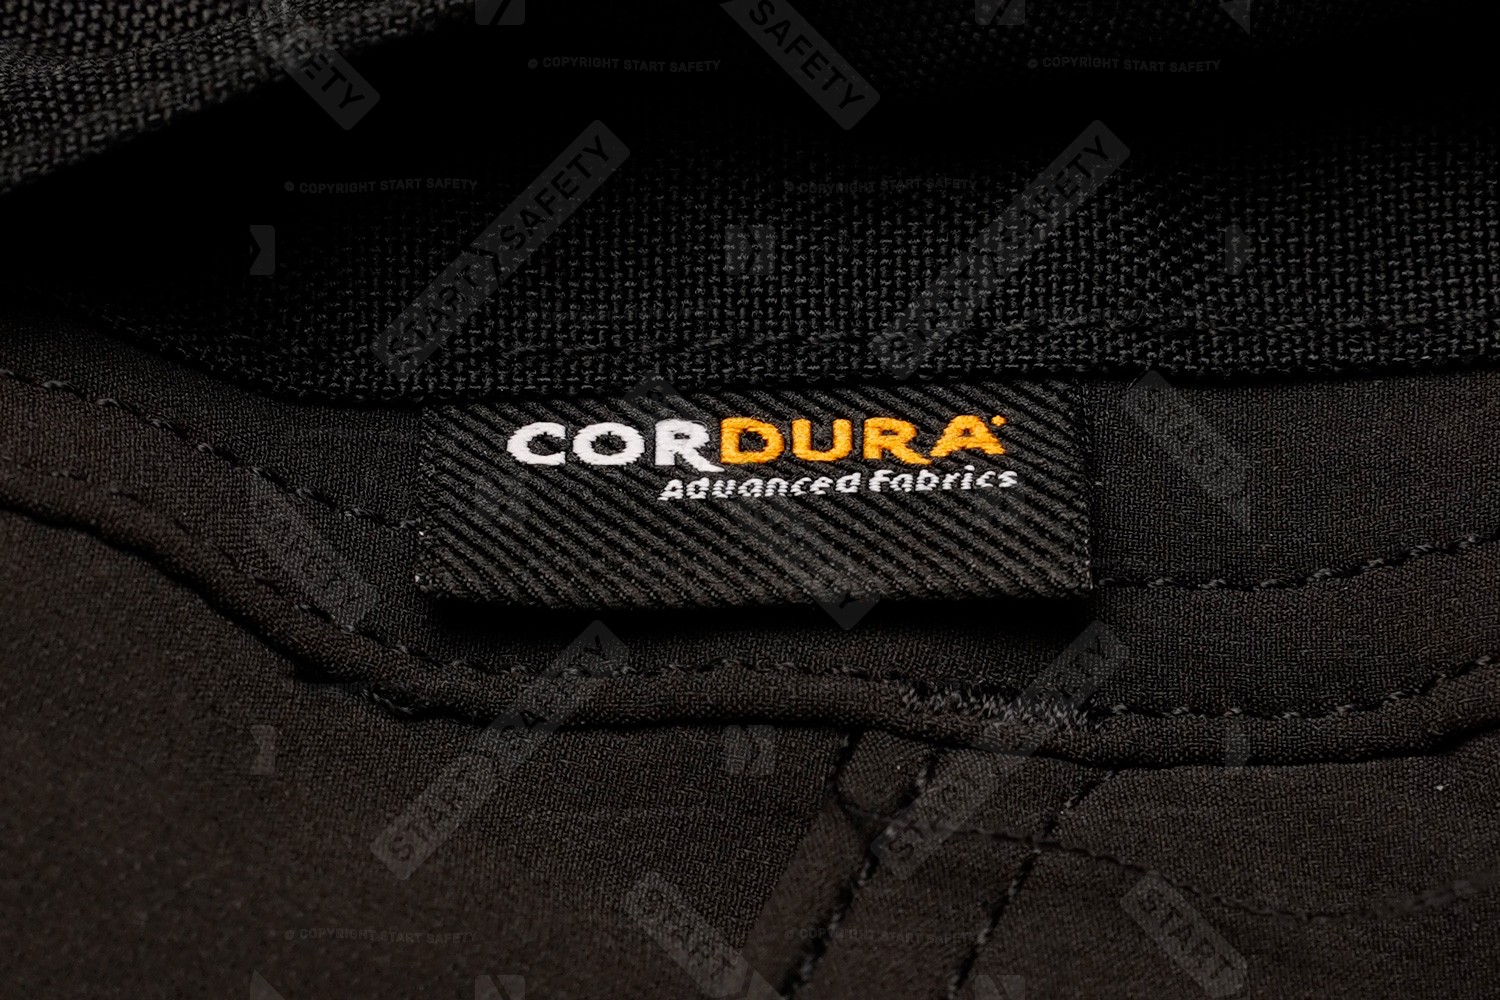 Durable Worktrousers With Cordura Fabrics